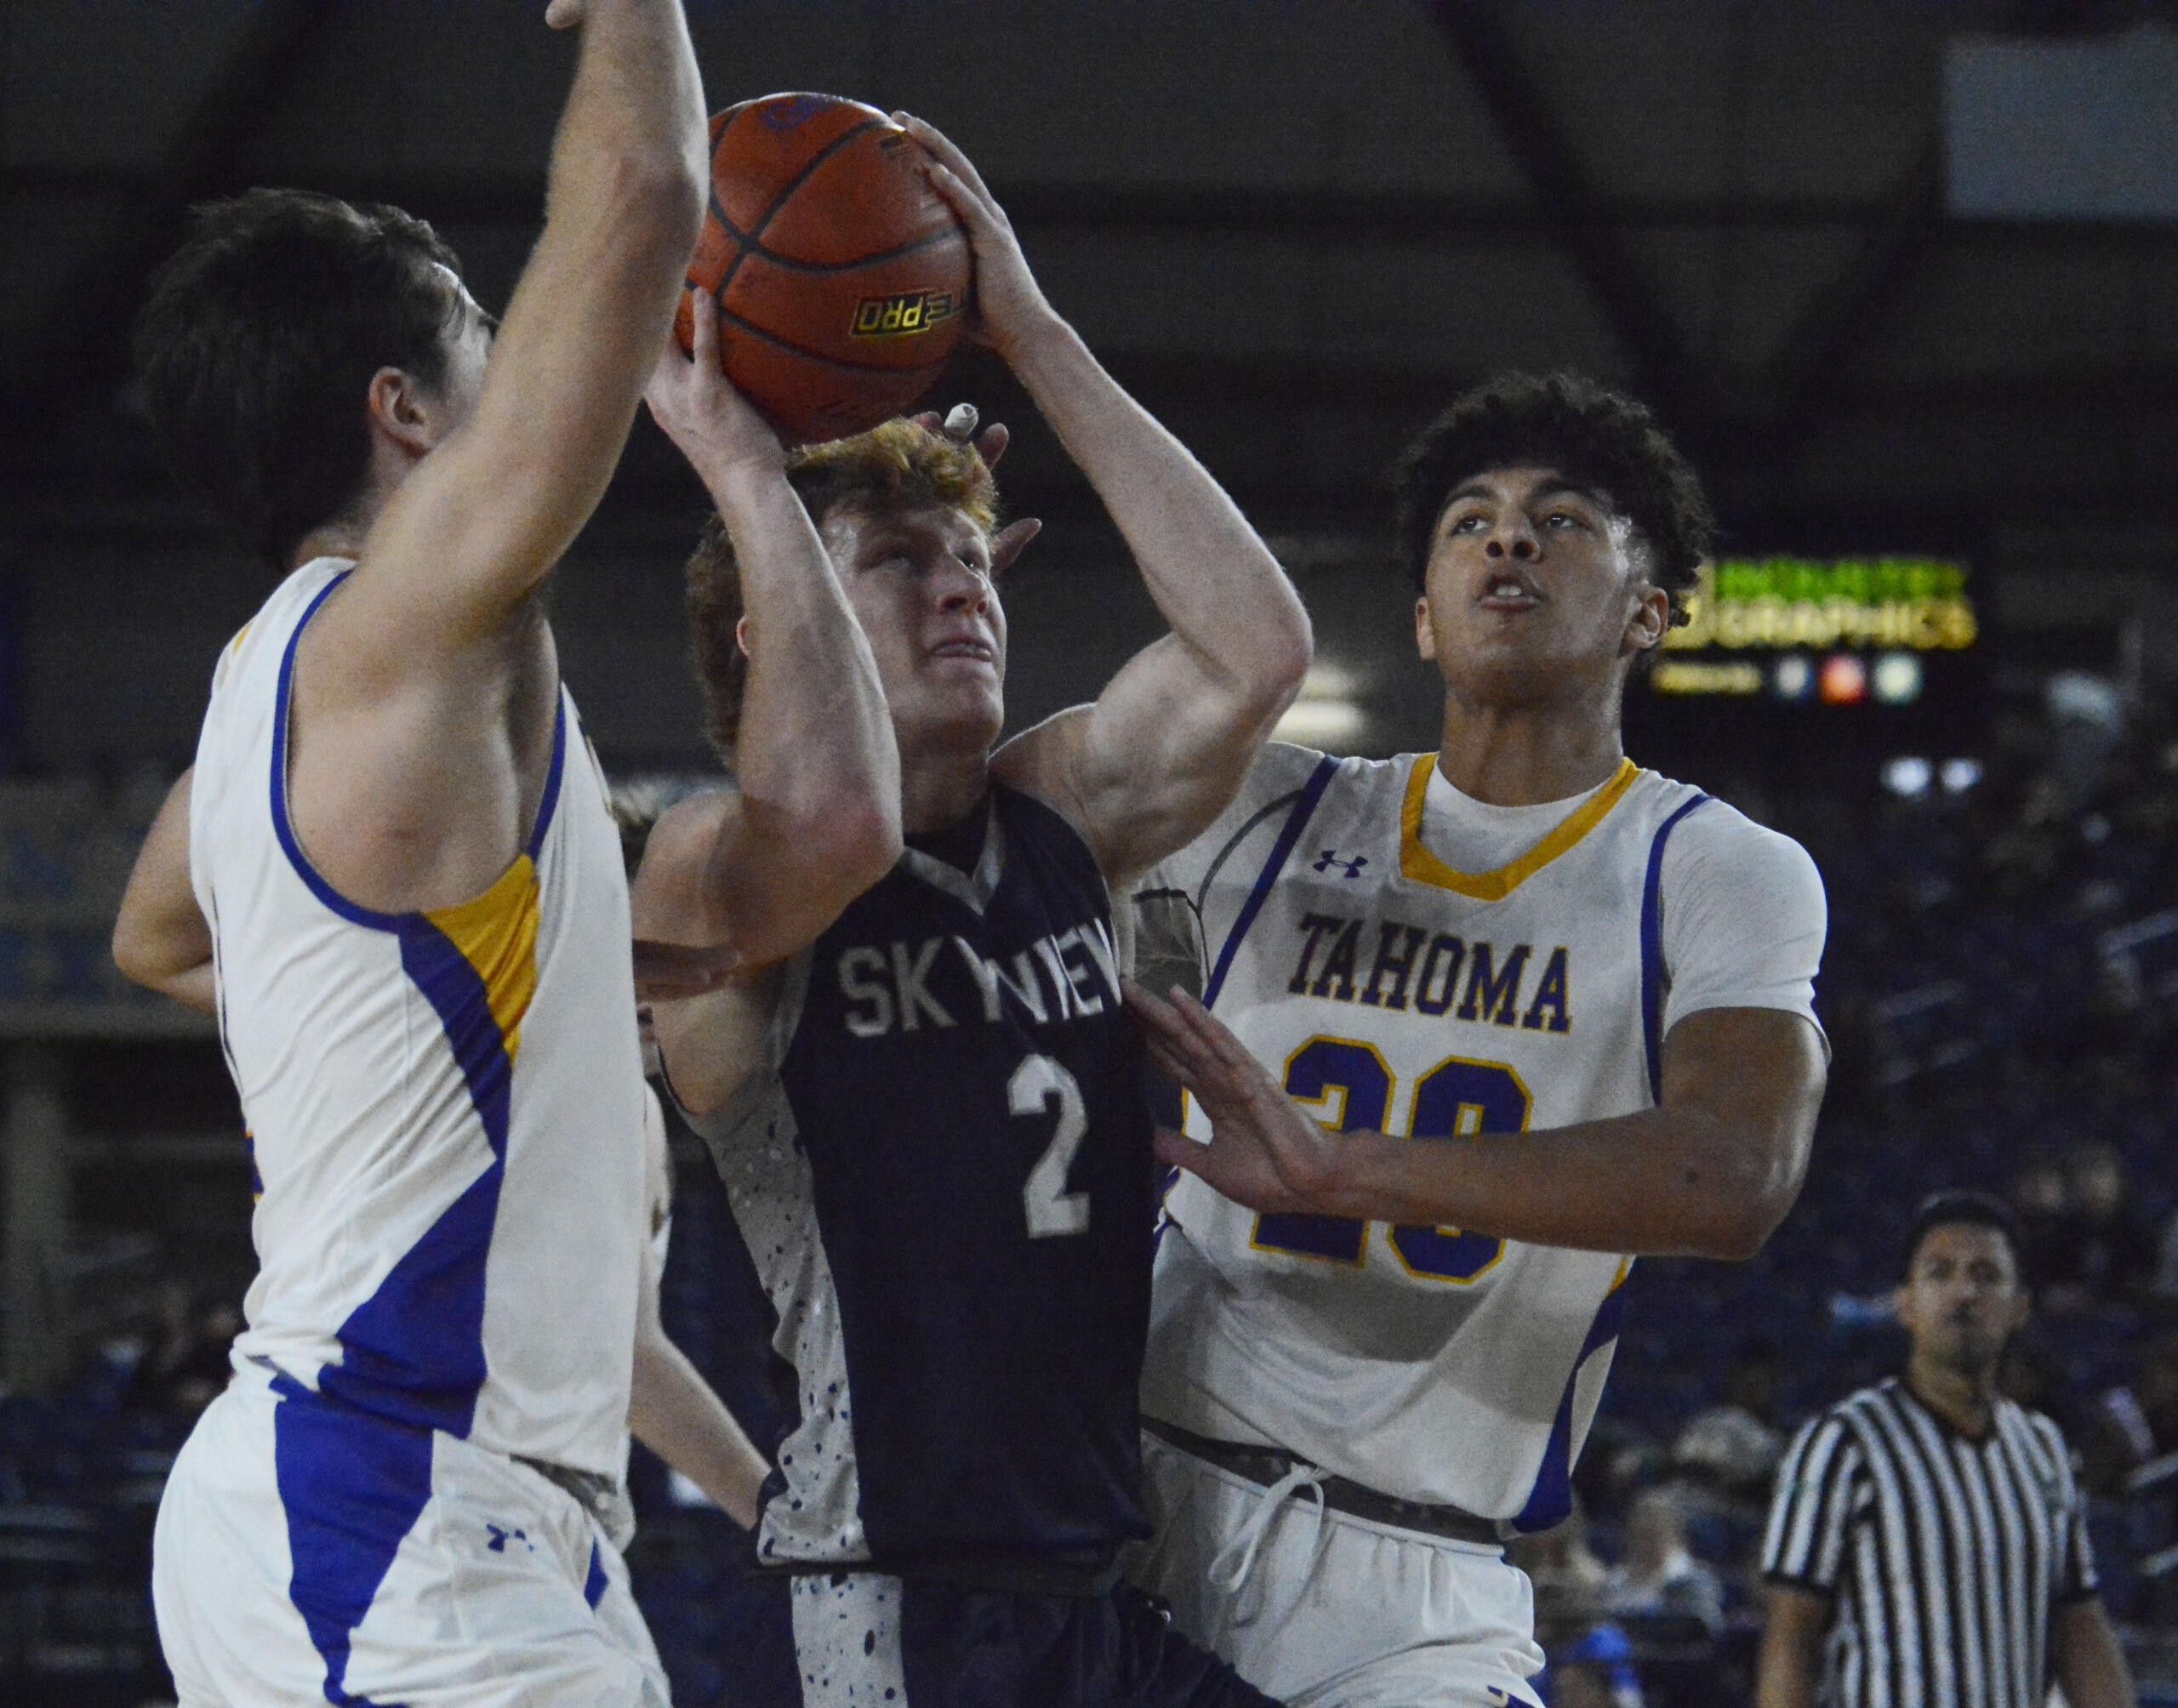 Gavin Packer (2) finds space in the lane amid Tahoma's defense during the first half of Skyview's consolation game against the Bears. Packer finished with six points, four rebounds and two assists.